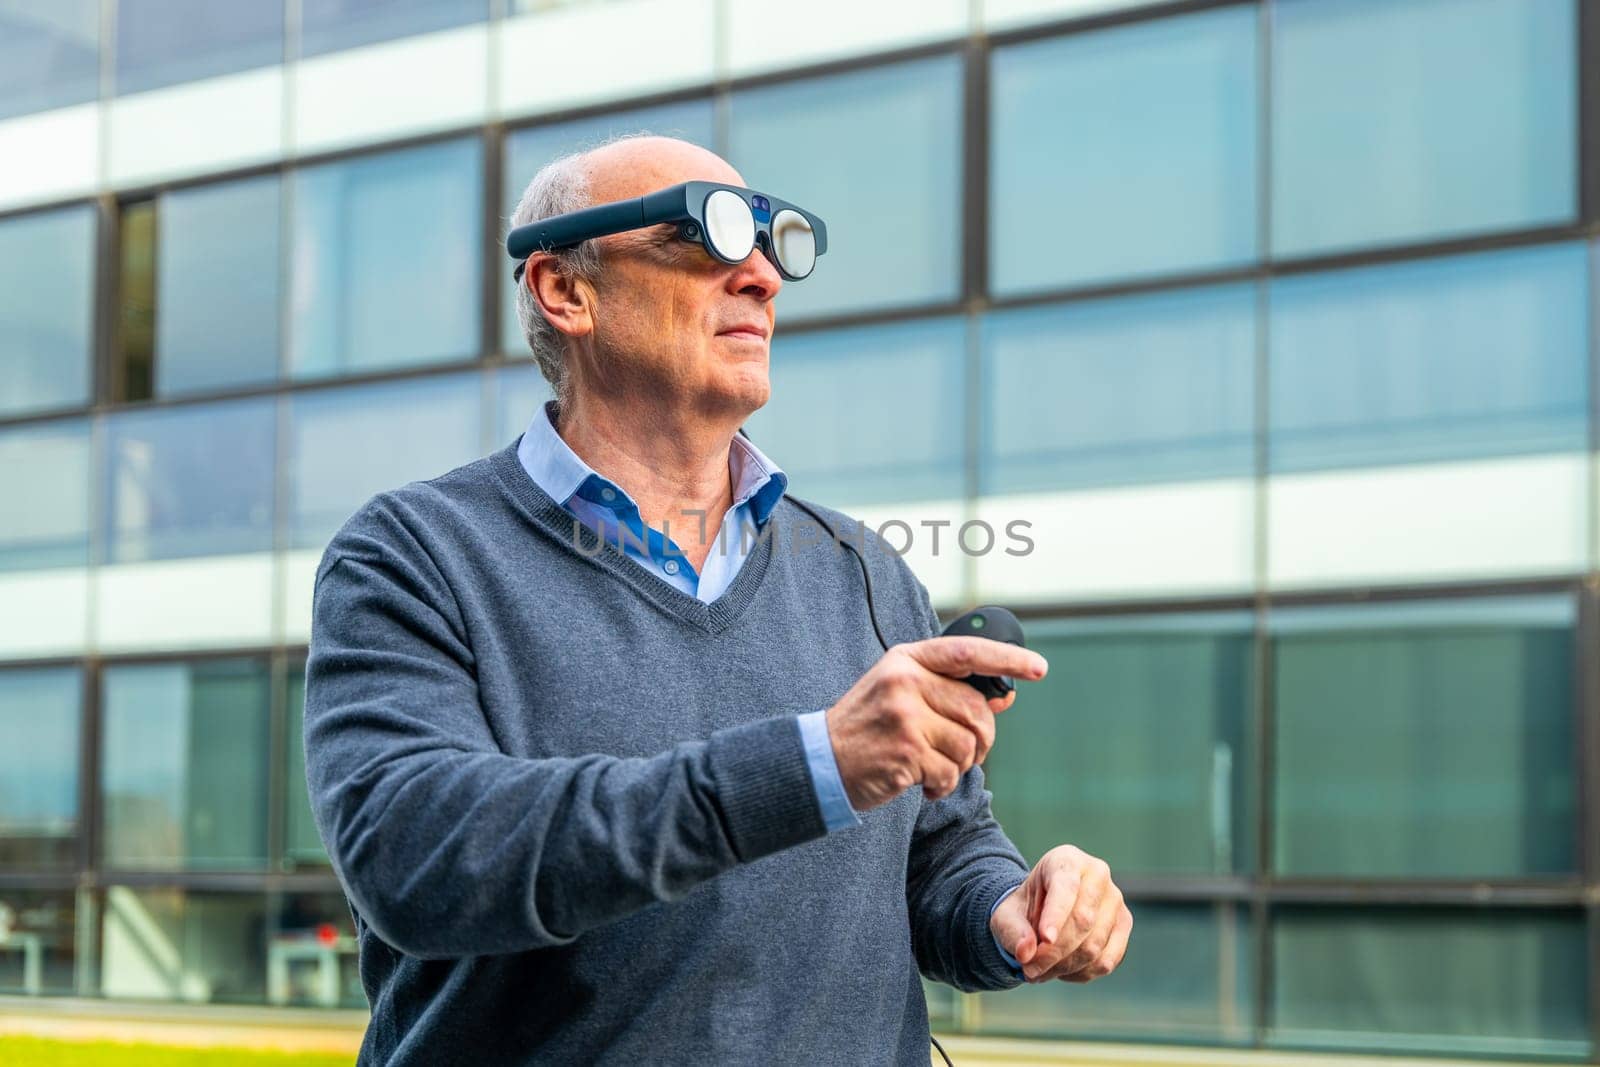 Aged man using futuristic augmented mixed vision headset by Huizi